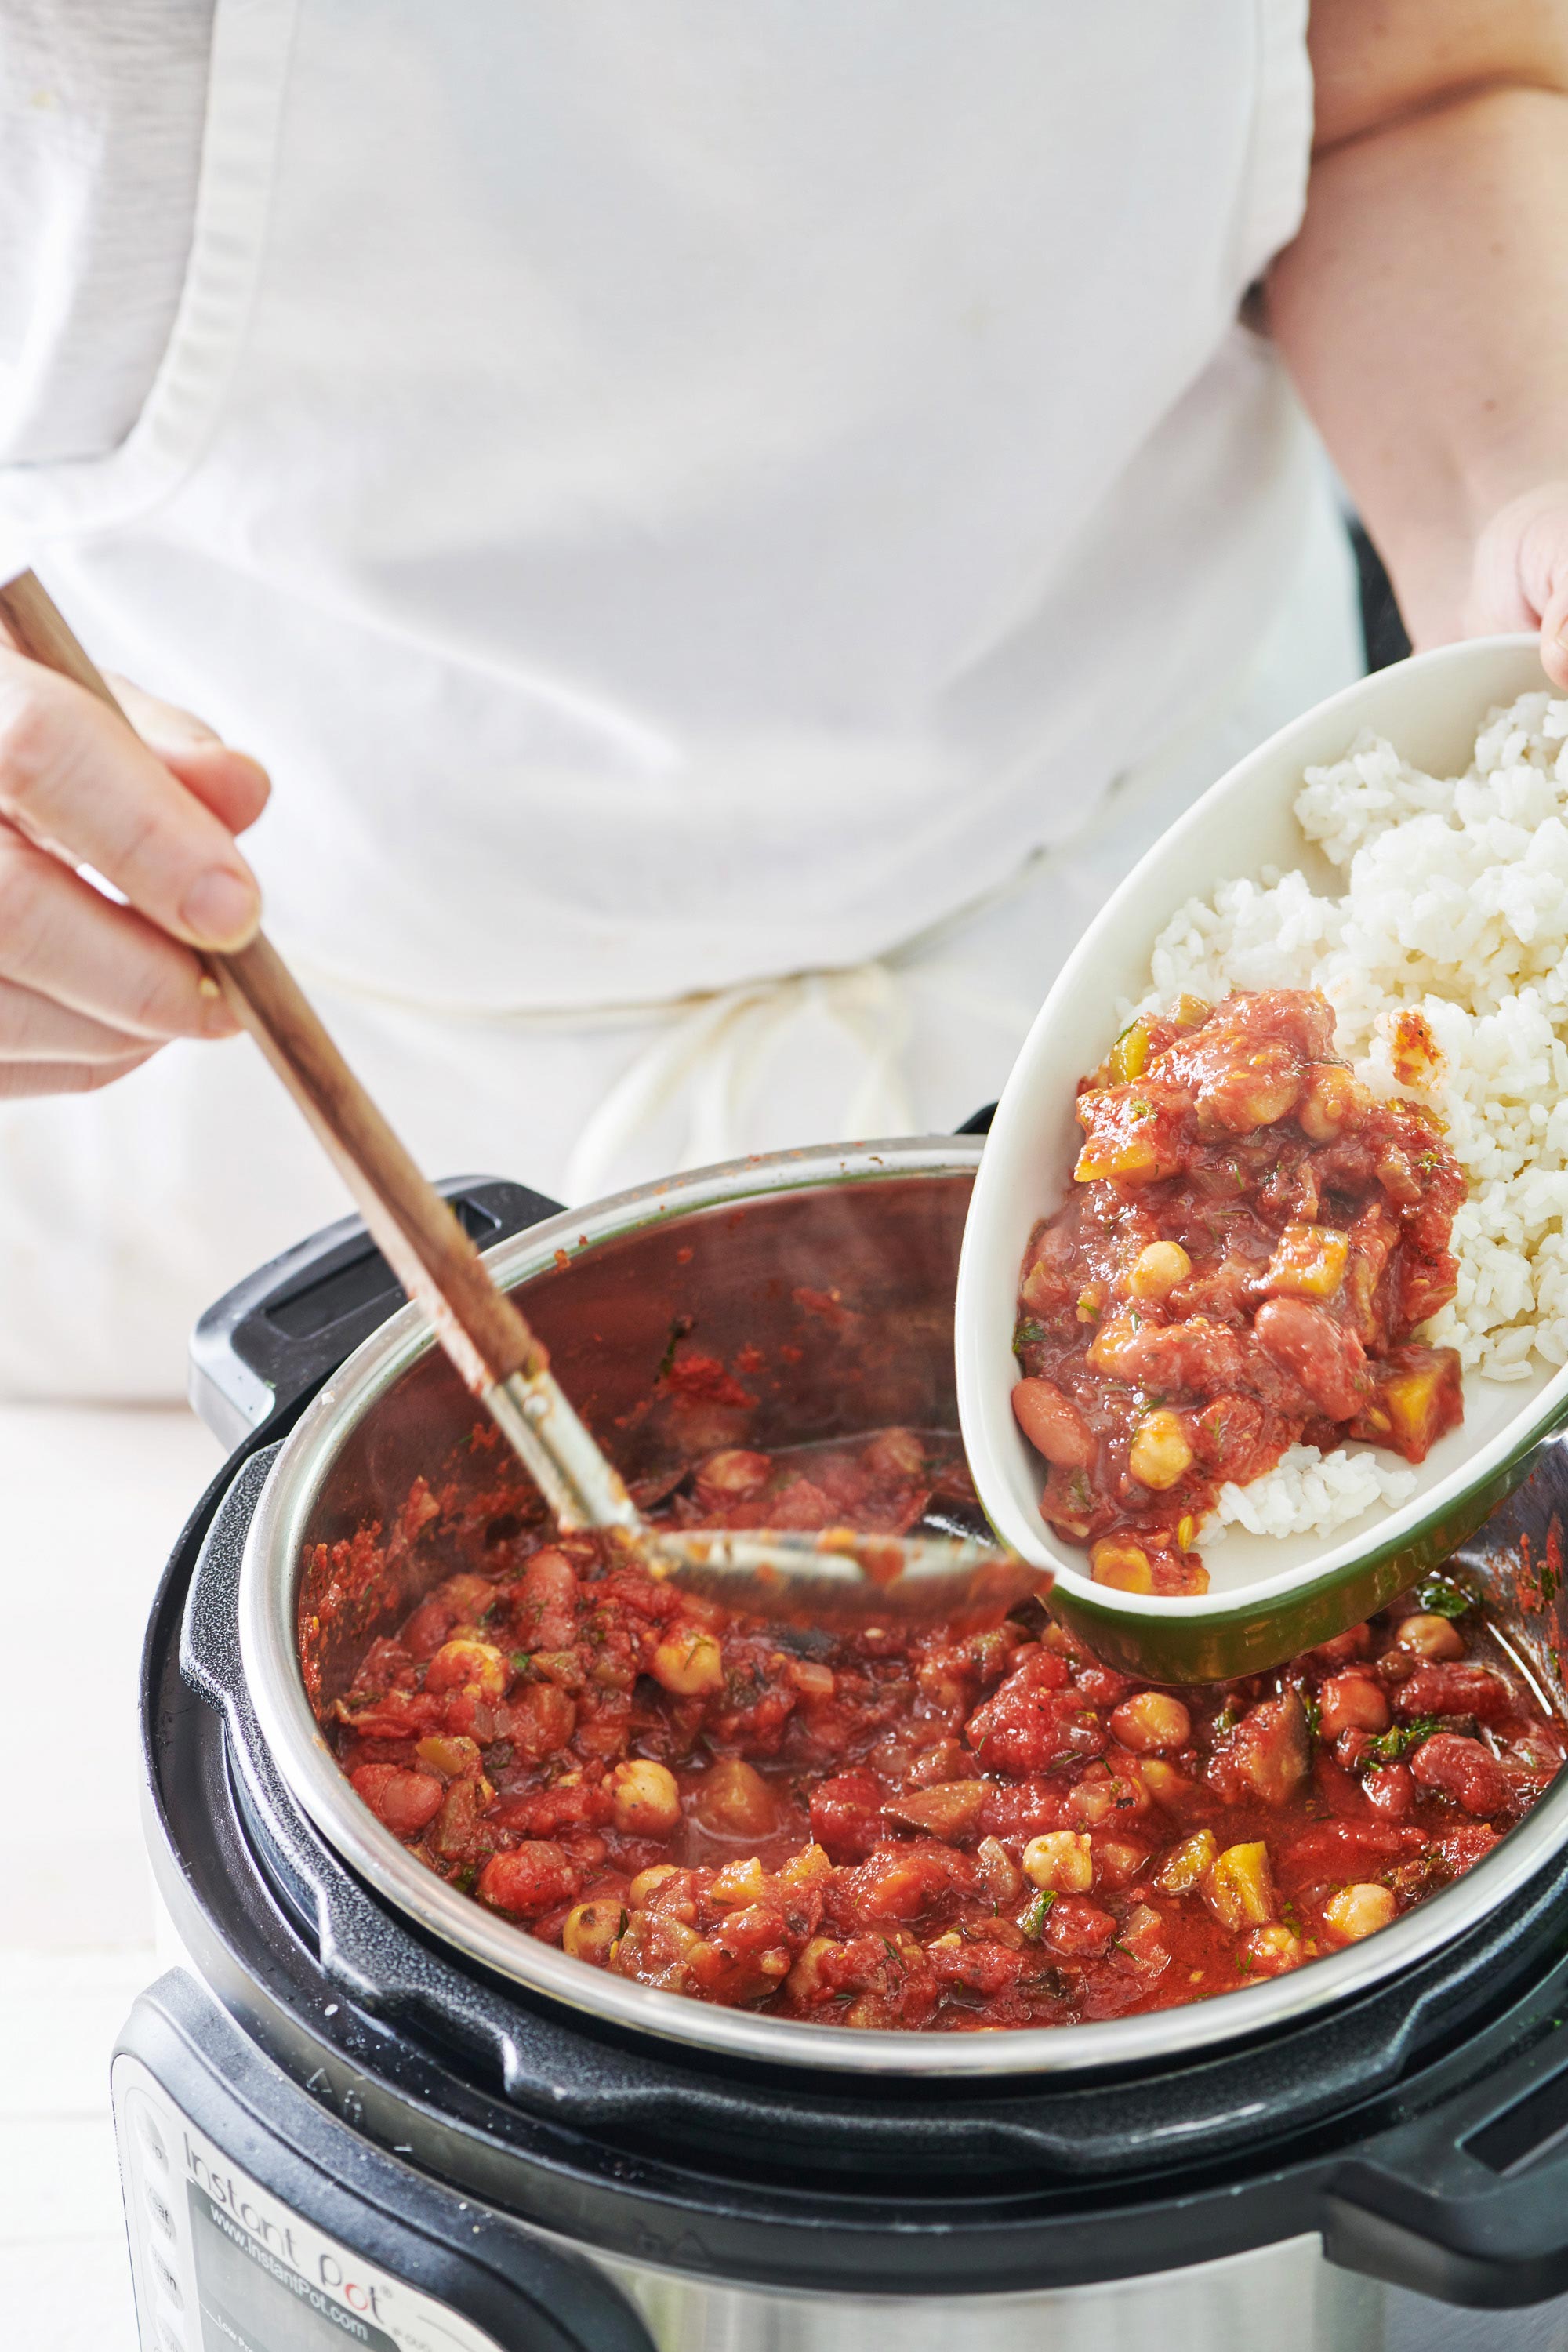 Ladle scooping Vegetable Chili onto plates of rice.